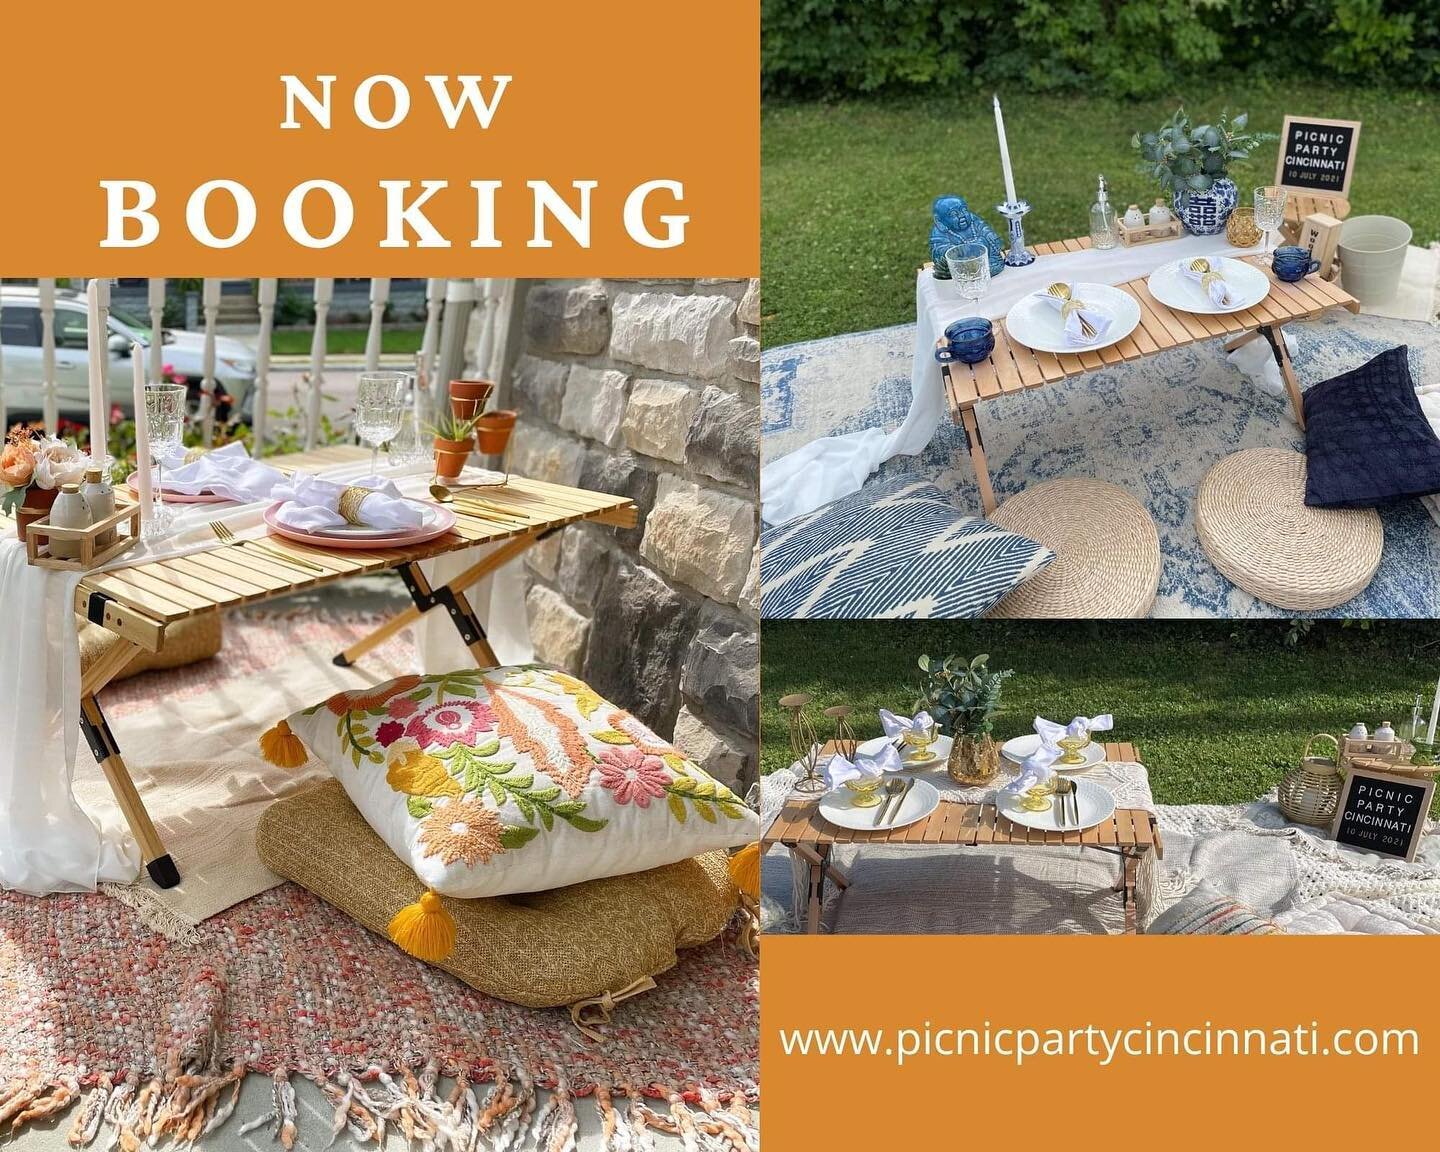 IT&rsquo;S TIME! Website and bookings are live! Be sure to check out picnicpartycincinnati.com to reserve your picnic today!